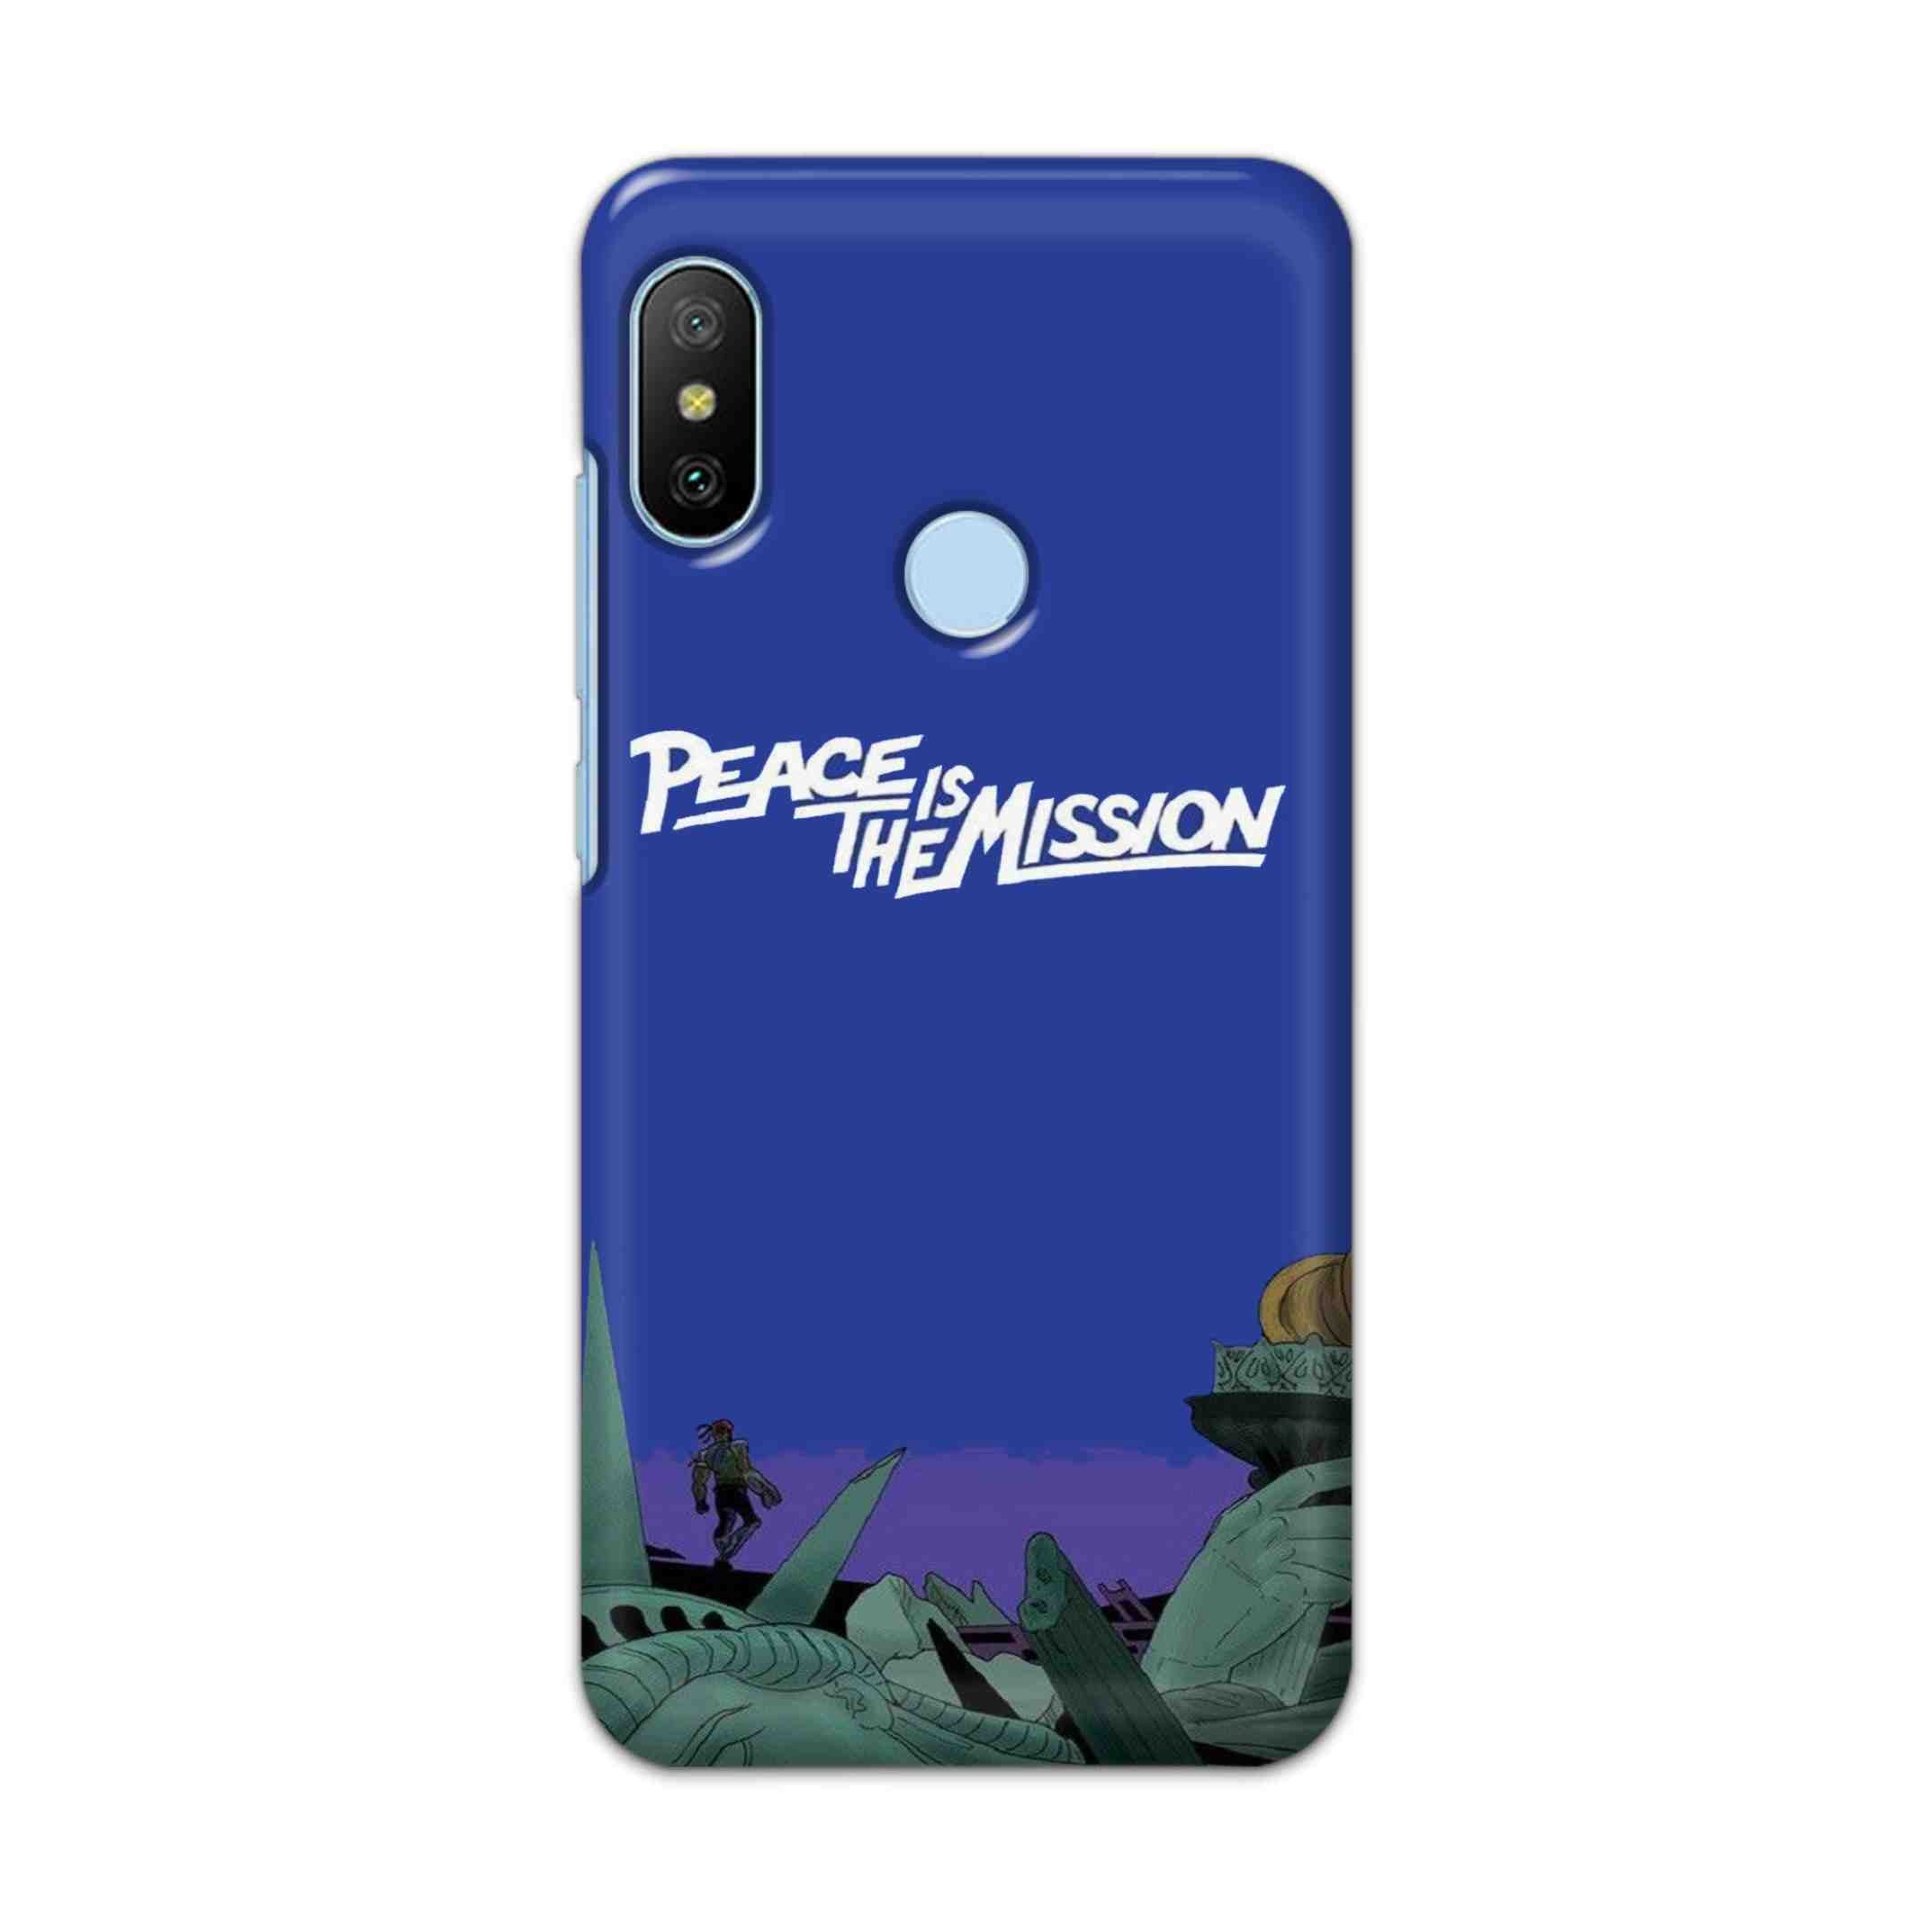 Buy Peace Is The Misson Hard Back Mobile Phone Case/Cover For Xiaomi Redmi 6 Pro Online